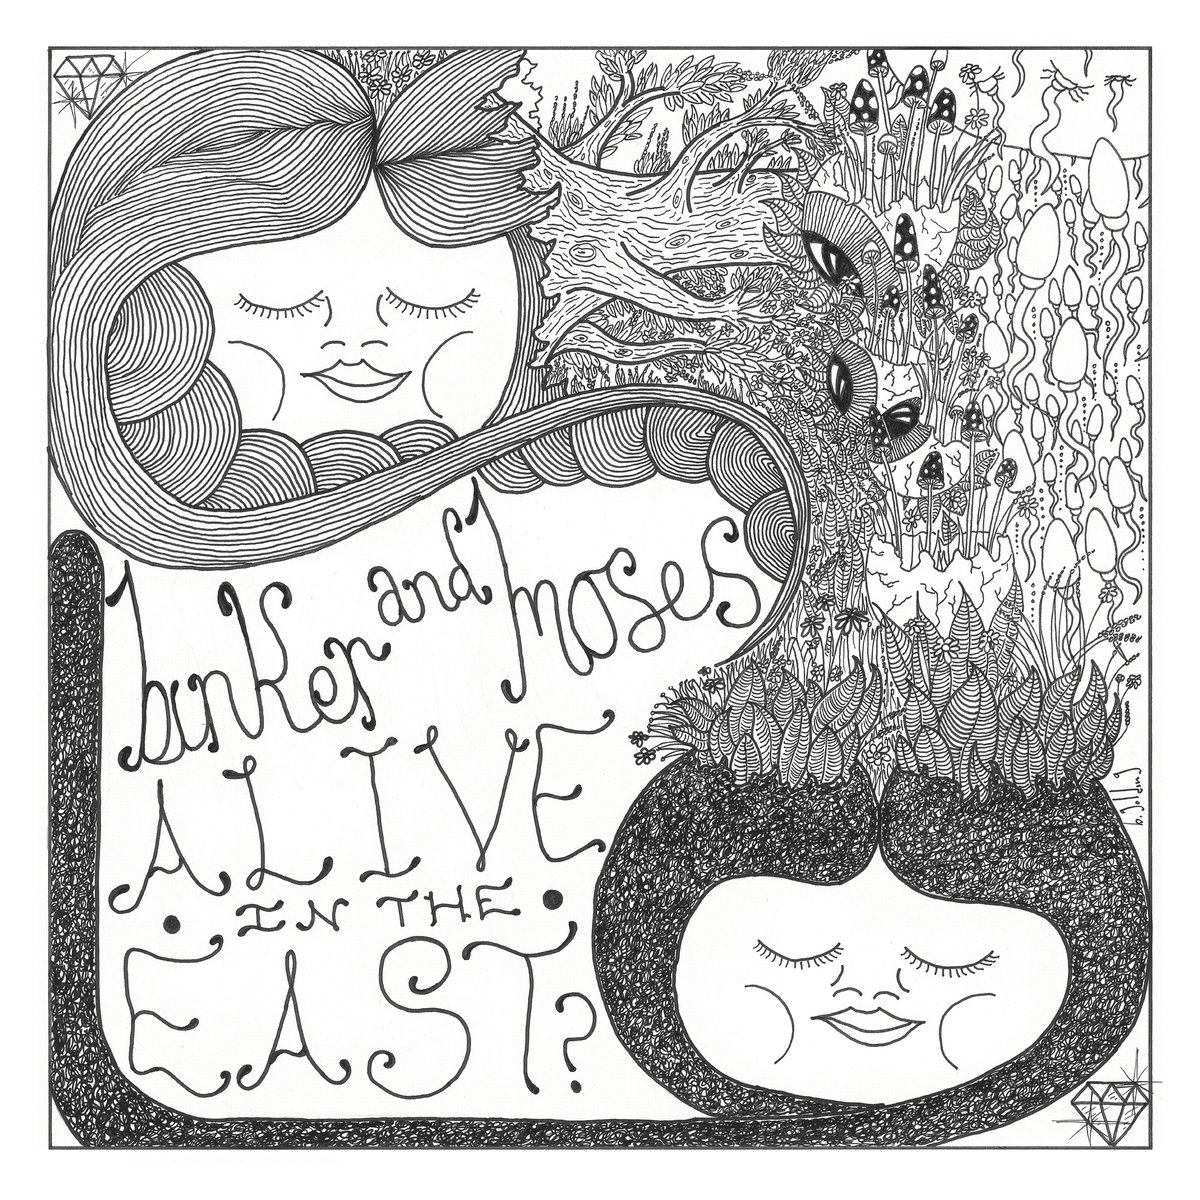 Album artwork for Alive in the East? by Binker and Moses